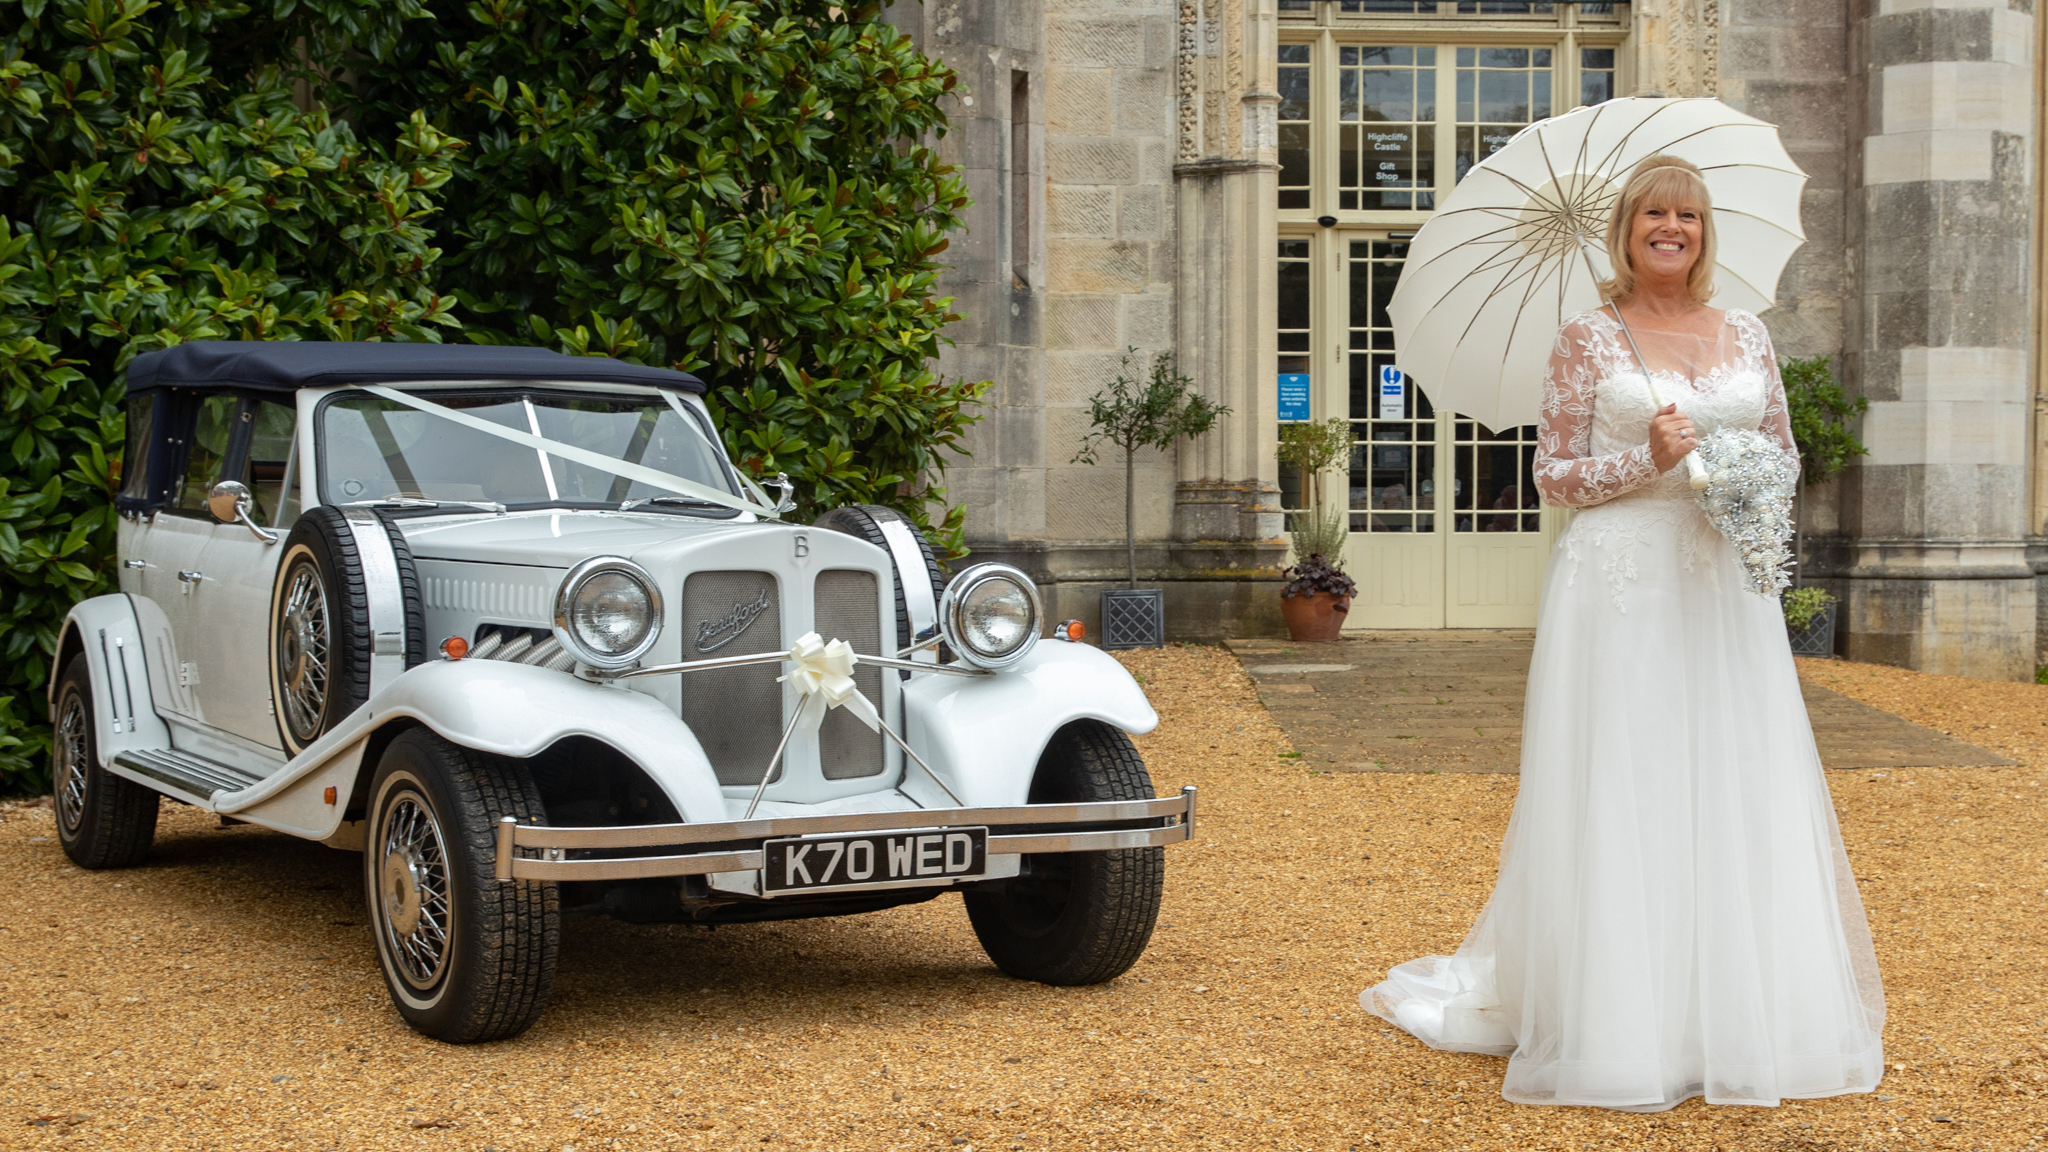 White vintage Beauford convertible with roof up decorated with white ribbon and bow at a local Maidstone wedding. Smiling bride standing next to the vehicle with a white umbrella h